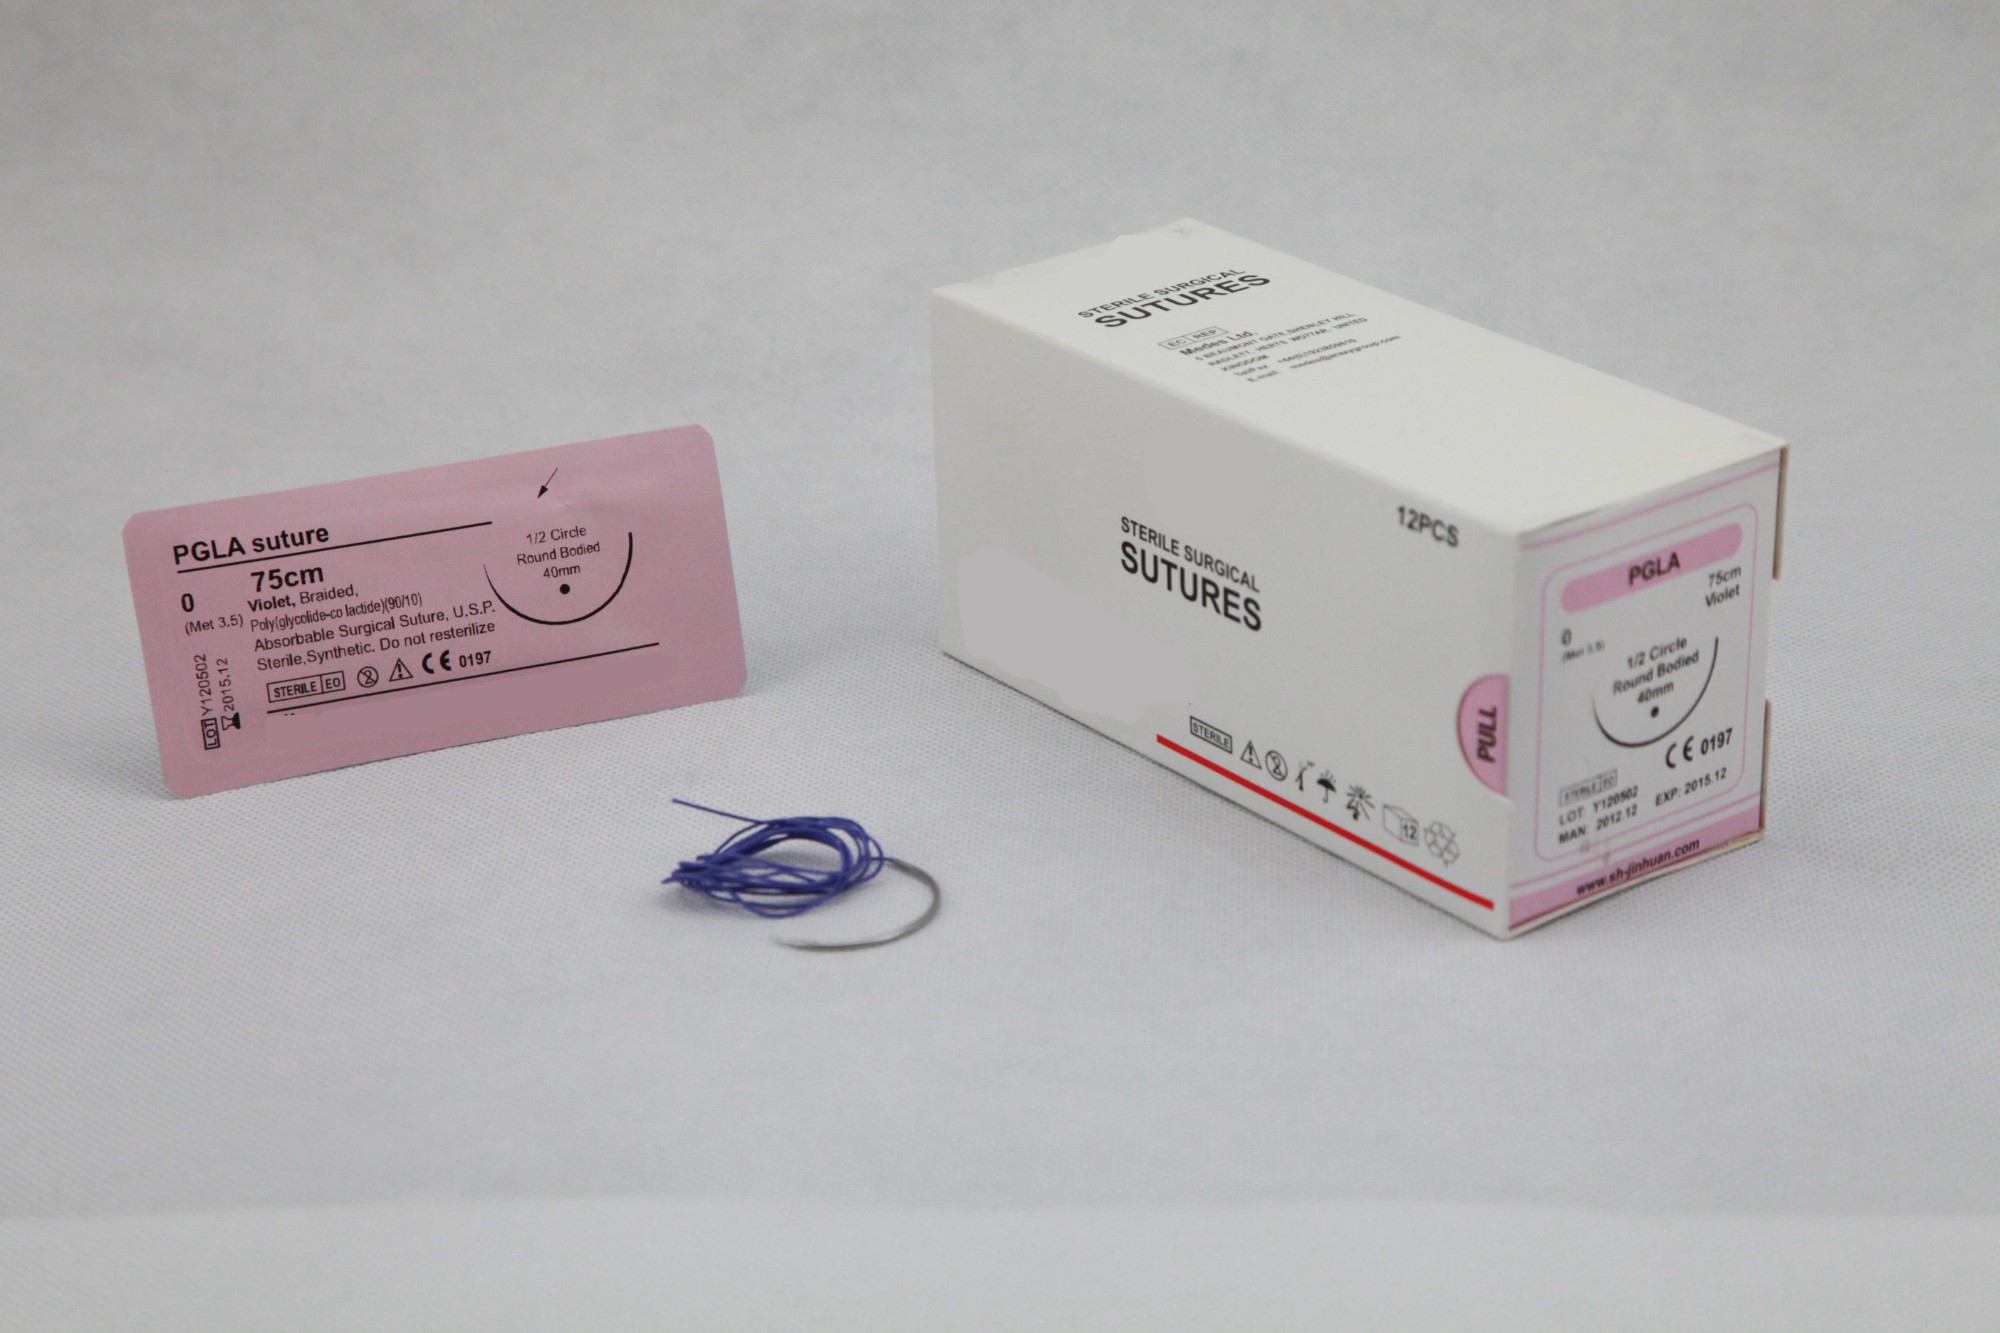 Absorbable Surgical Suture PGLA